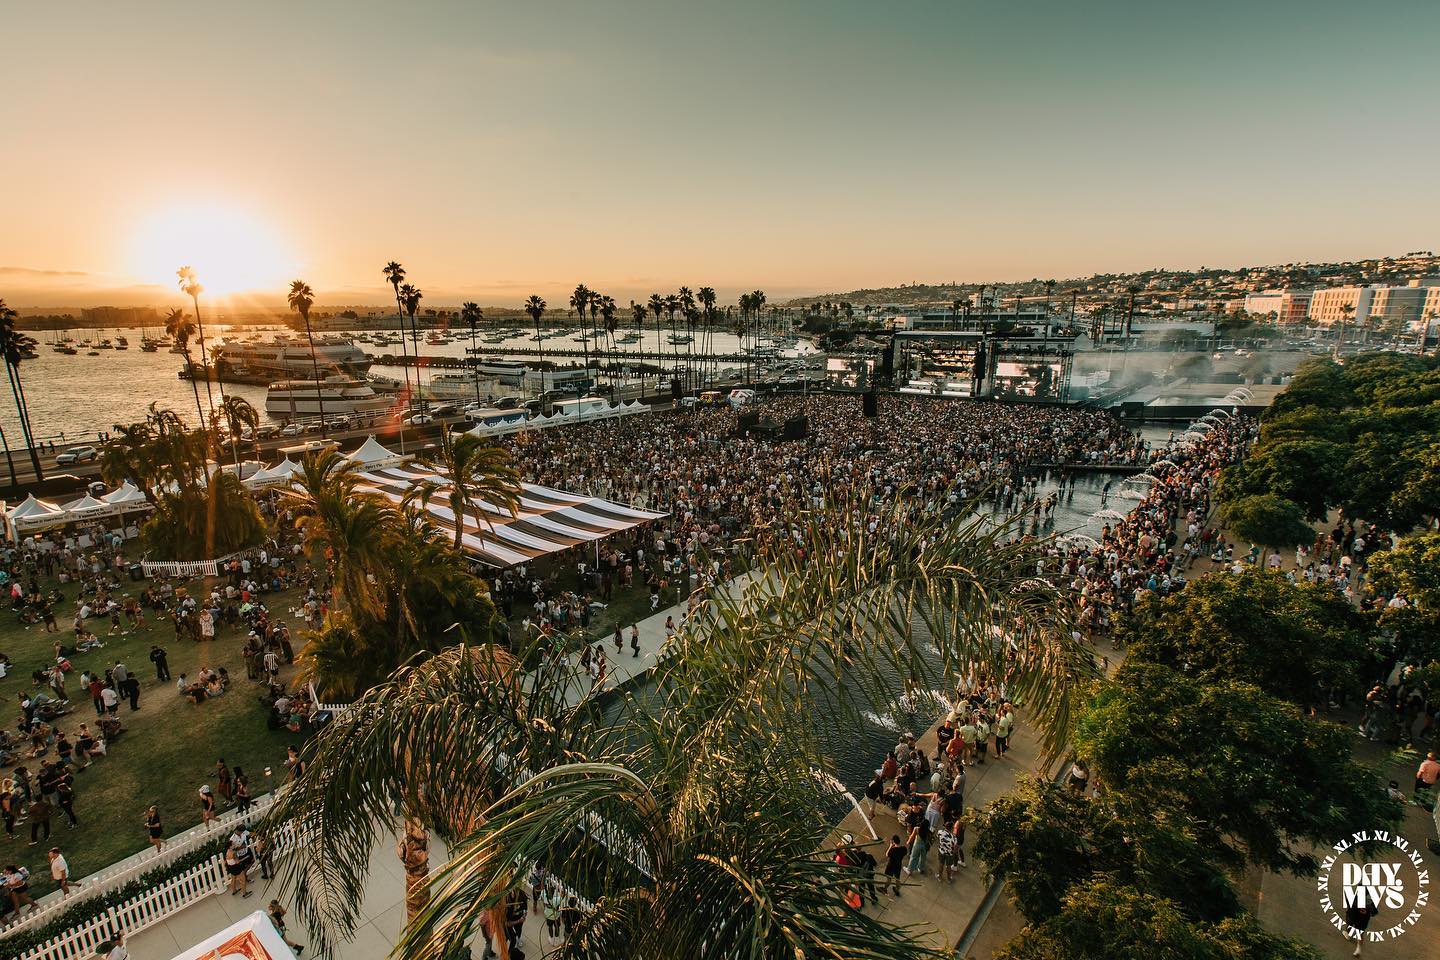 The Top 7 Venues in San Diego for EDM EDM Maniac